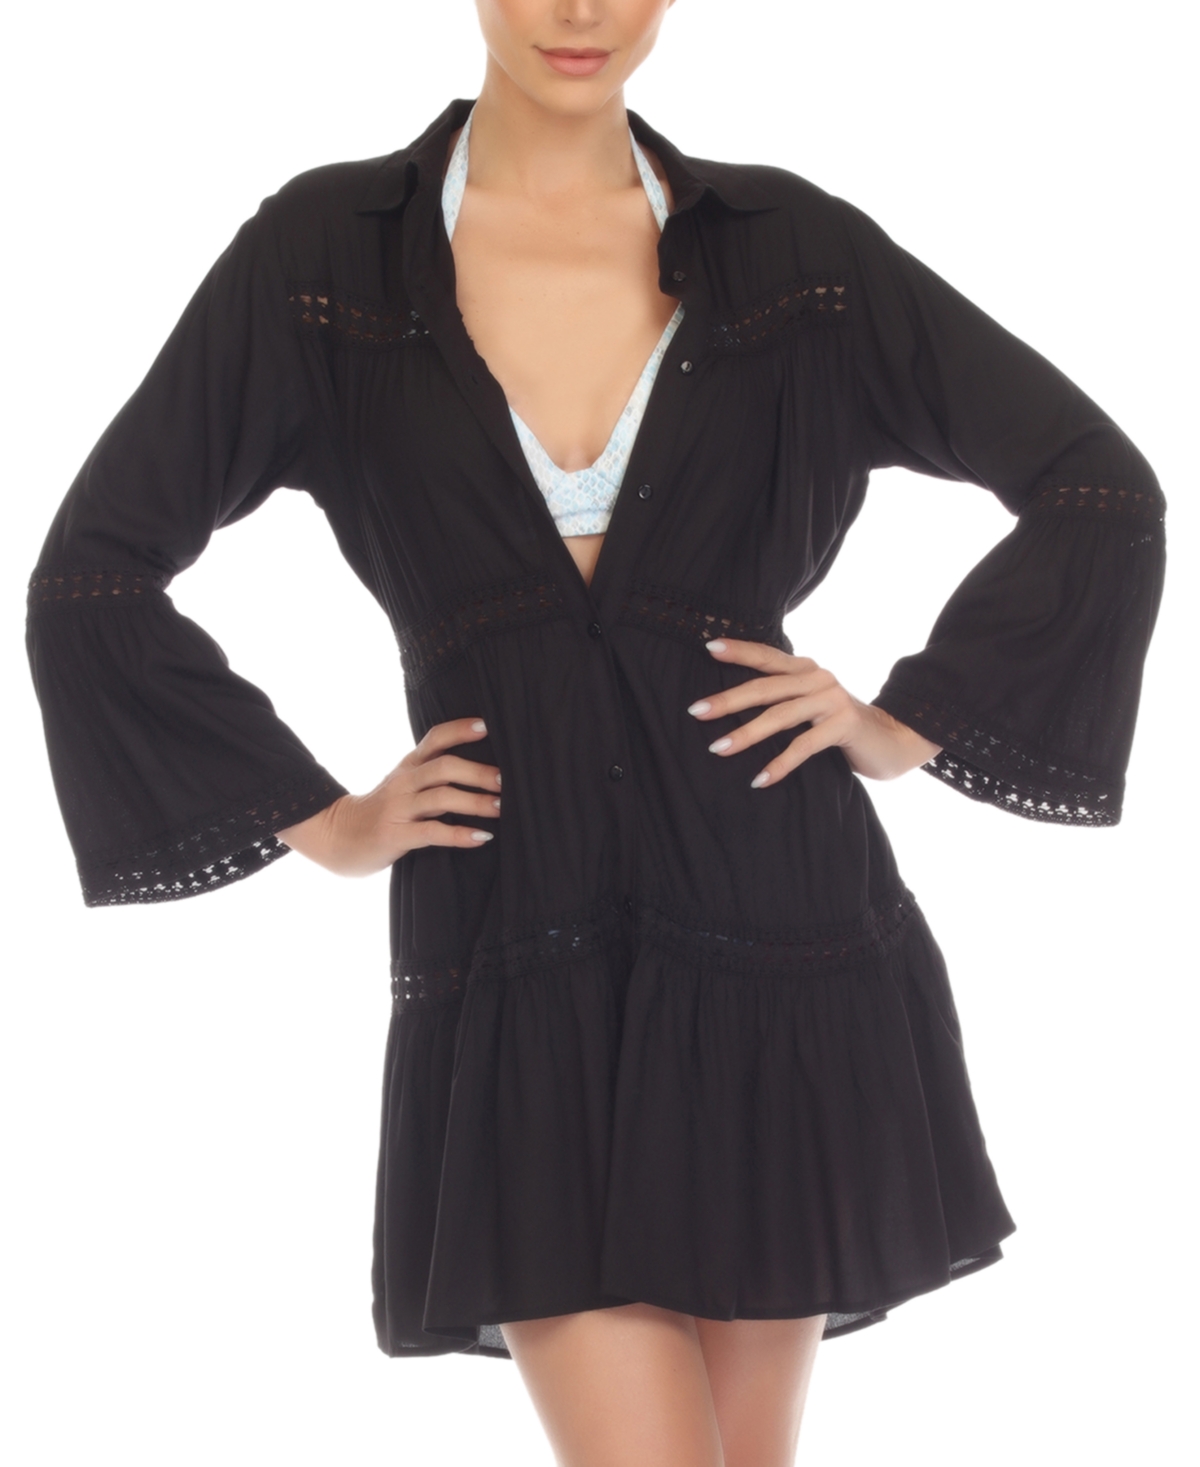 Raviya Plus Size Lace-insert Cover-up Long-sleeve Shirt Women's Swimsuit In Black